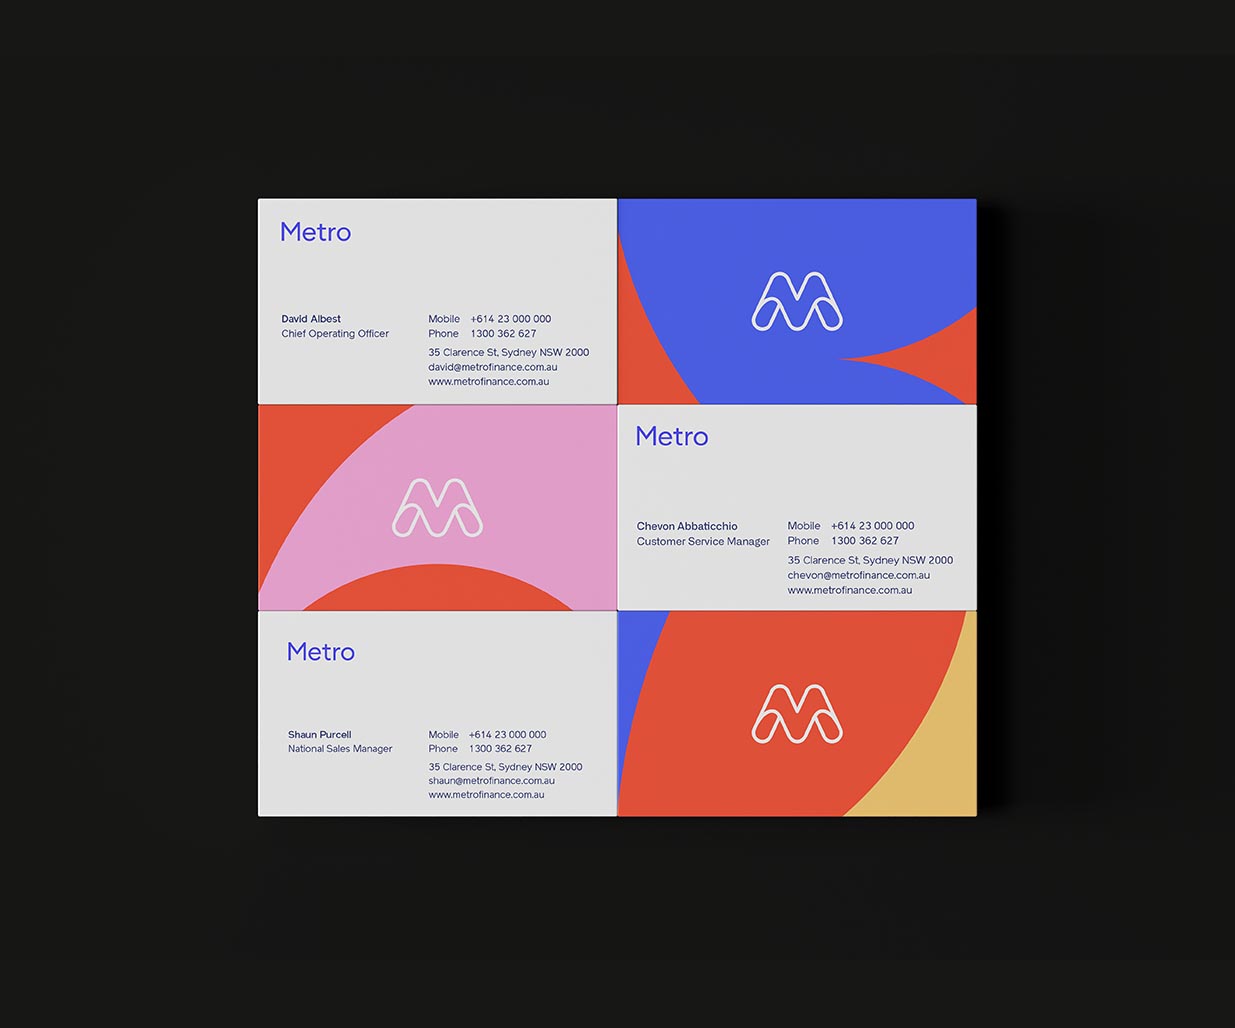 Brand positioning and rebrand project for Metro Finance's new brand identity, Image I